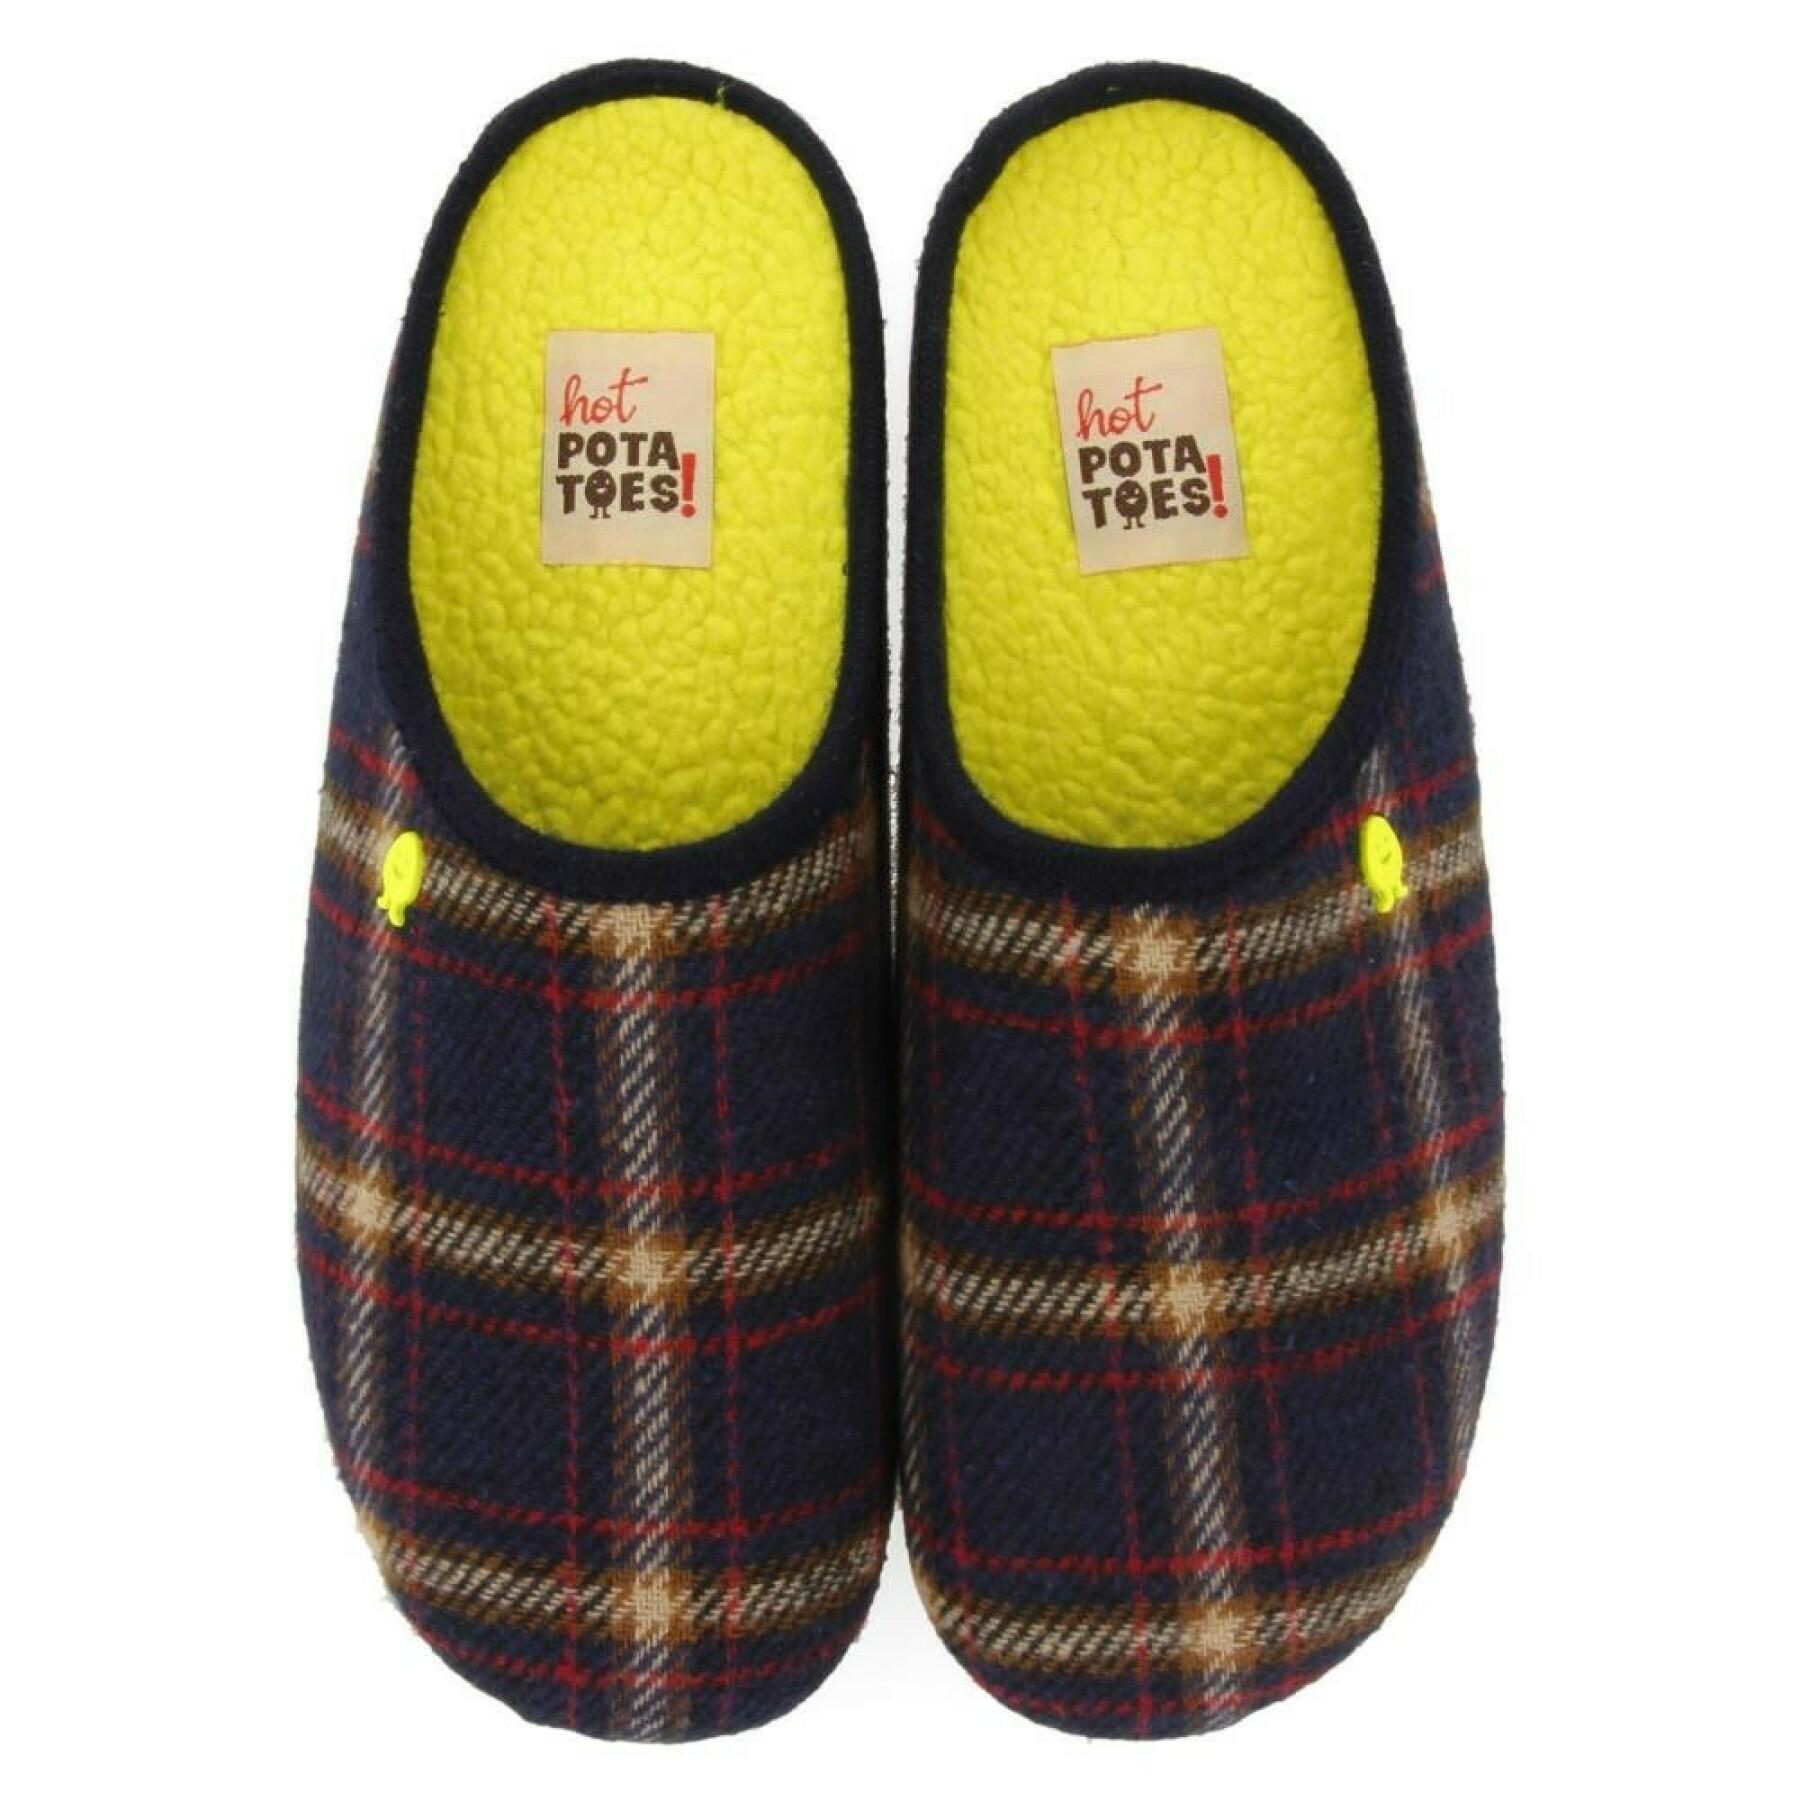 Slippers from the collection Hot Potatoes damuls